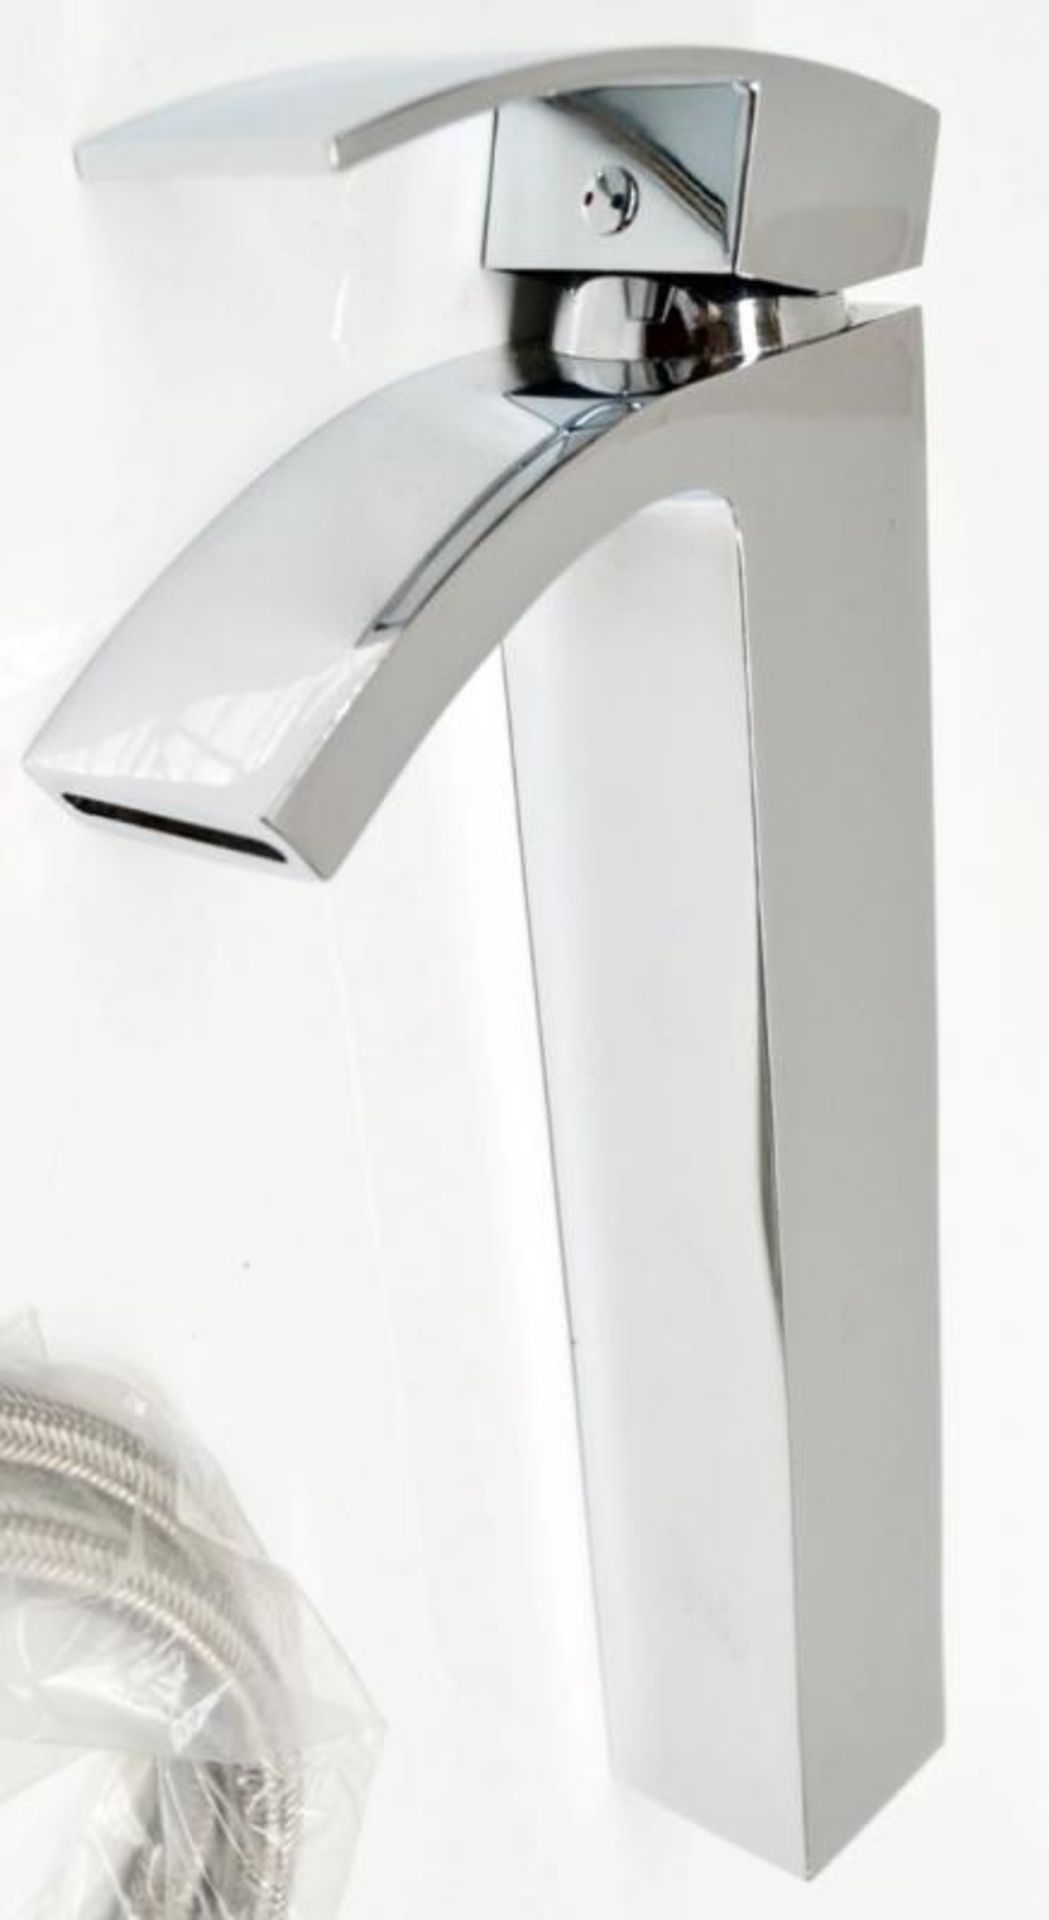 1 x CENTURY Basin Mixer Tap - Made From Solid Brass And Dipped In Chrome For A Seamless Finish - Ref